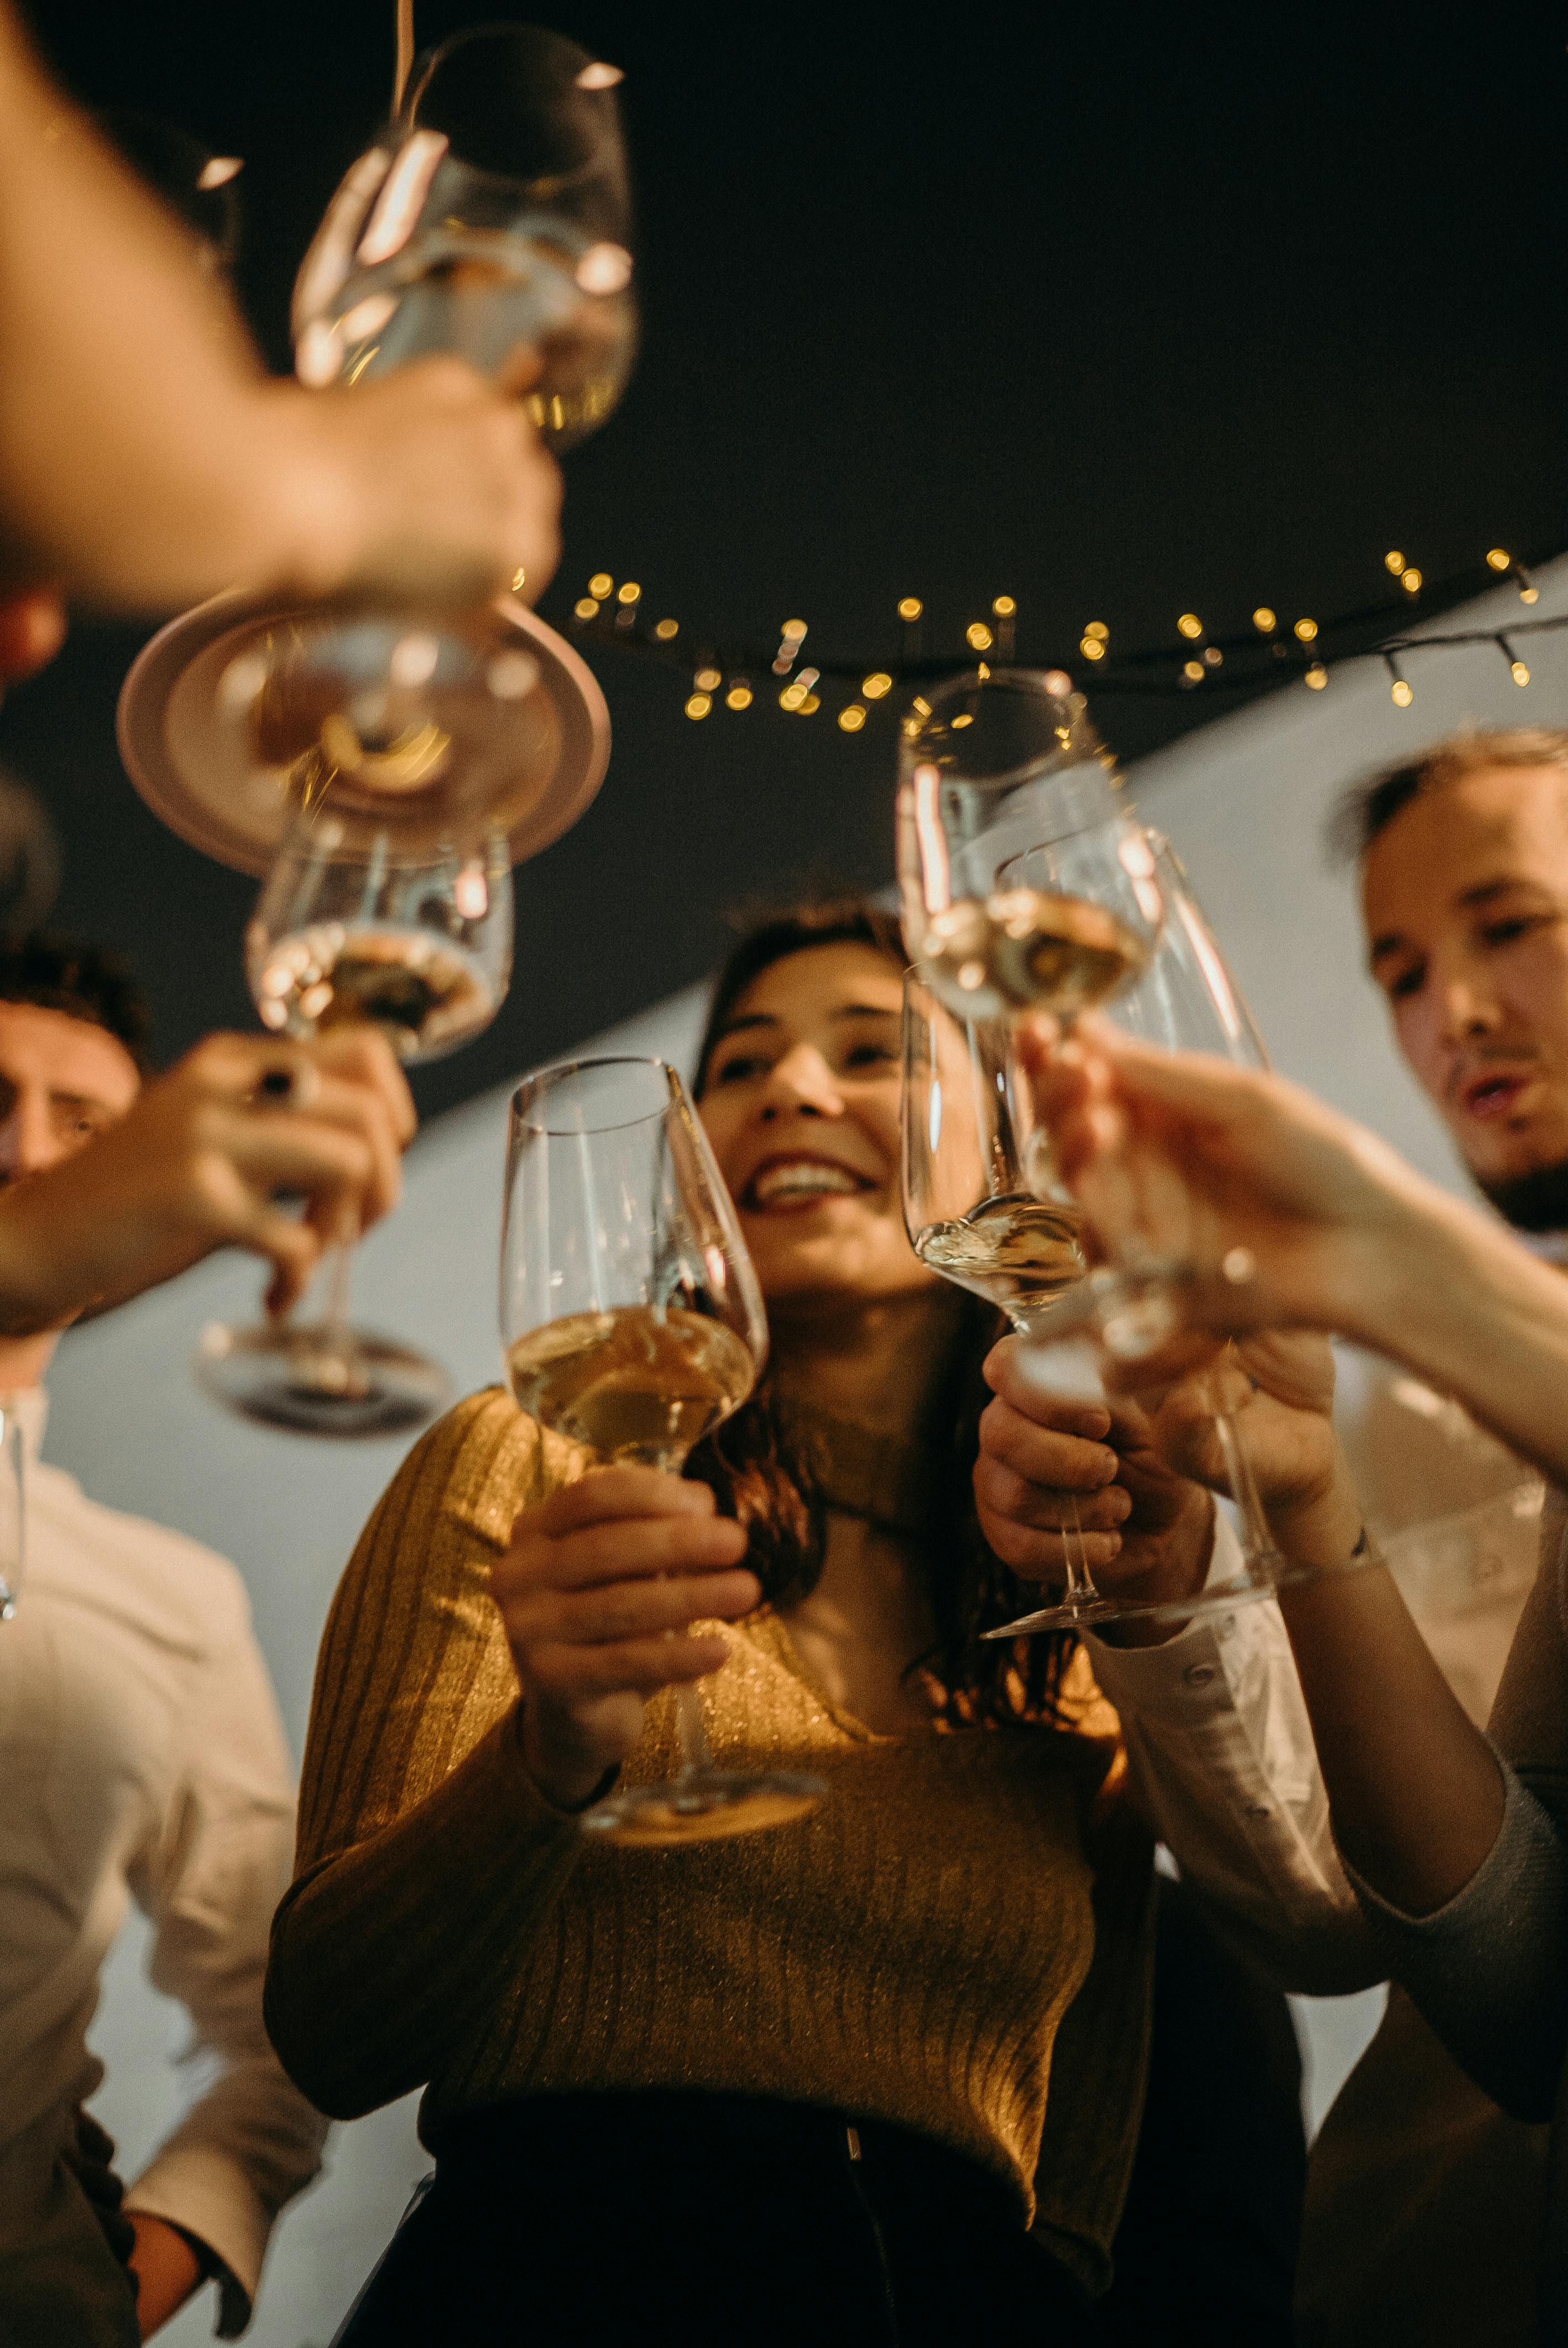 A group of friends having a toast | Source: Pexels